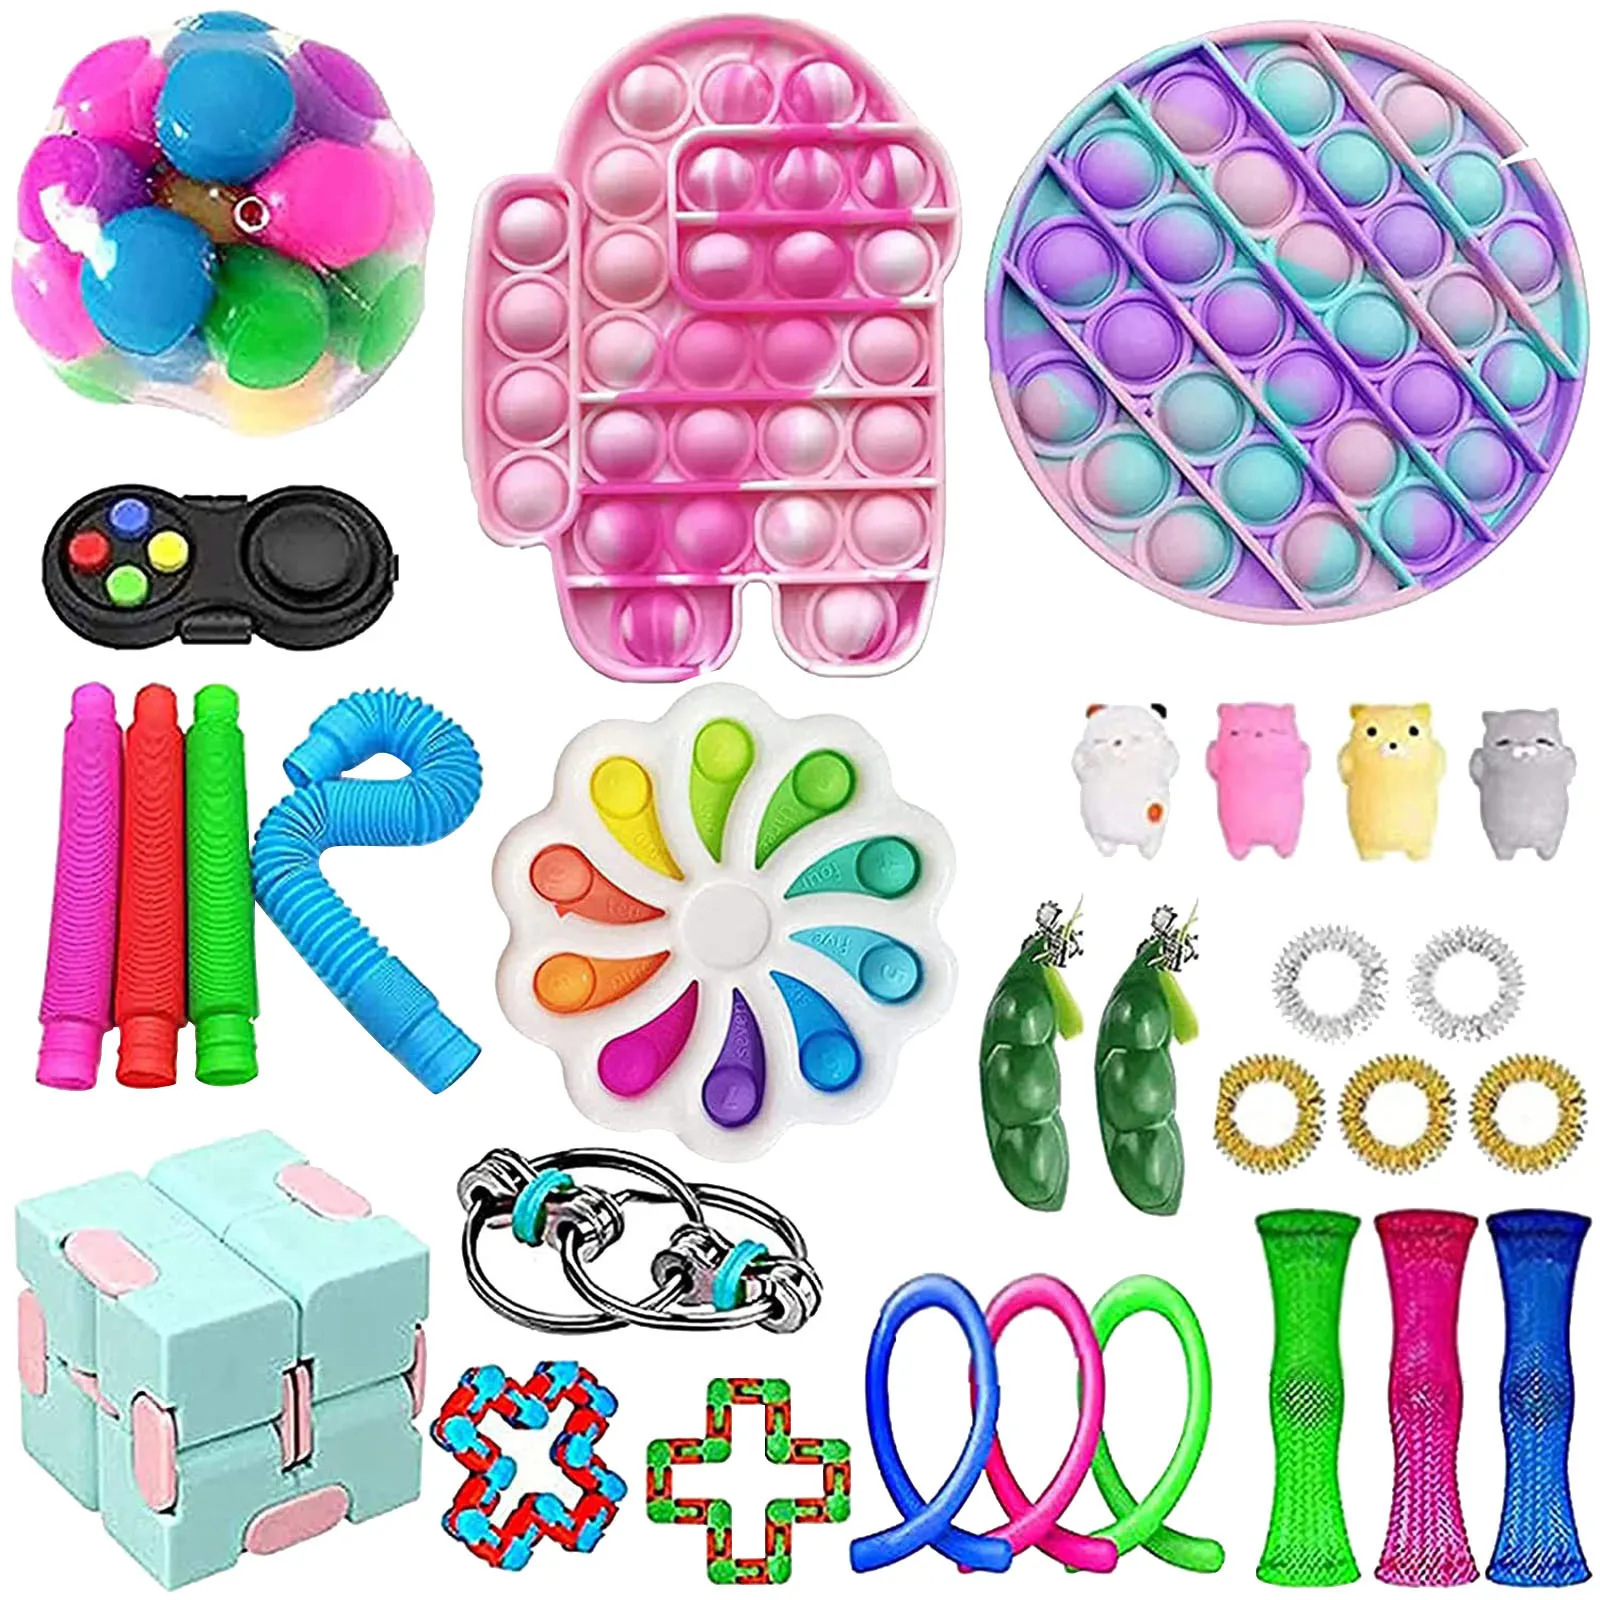 30PC Cheap Fidget Toys Anti Stress Set Strings Relief Pack Gift for Adults Children Figet Sensory Squishy Relief Antistress 2021 enlarge